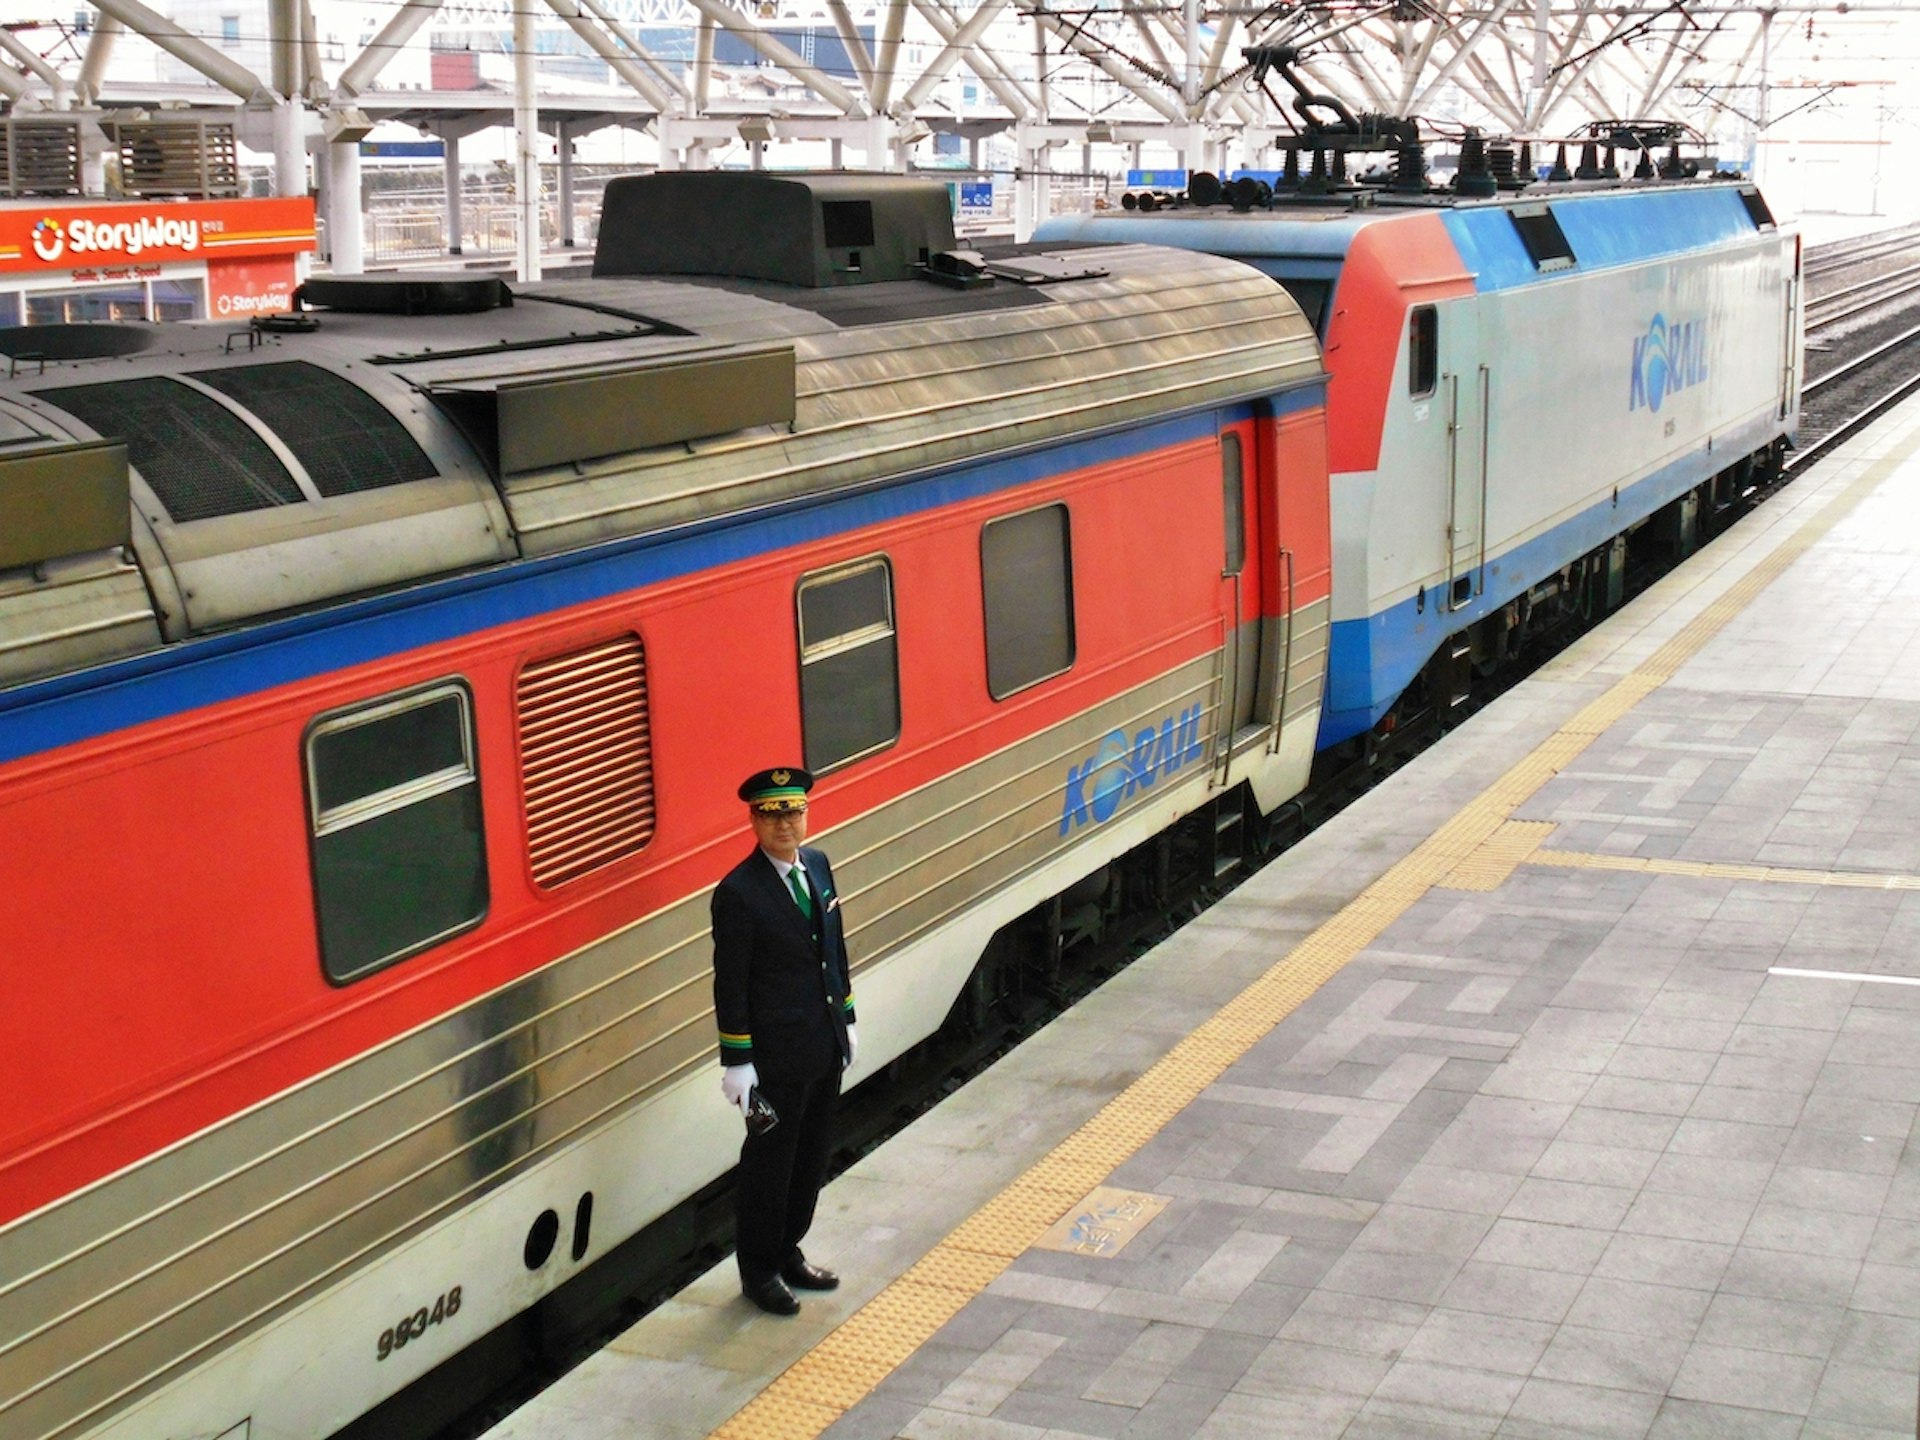 A conductor stands on a platform in front of a train in a station, Seoul, South Korea